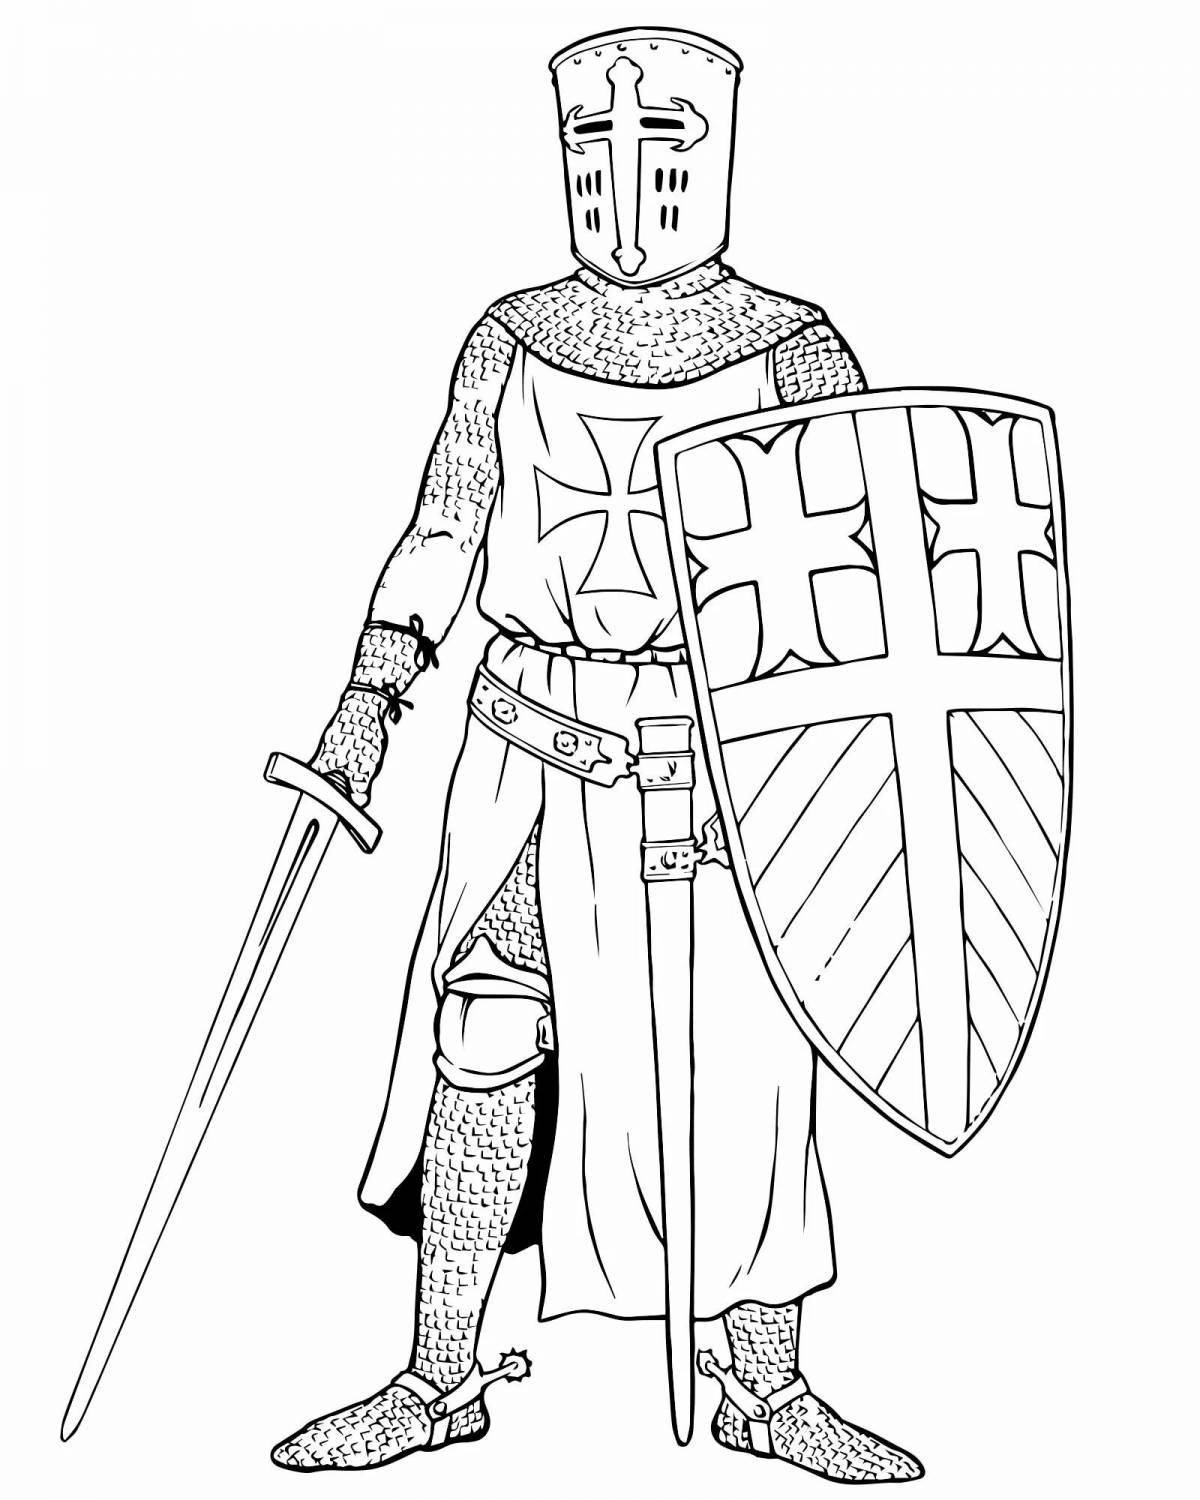 Great armored knight coloring book